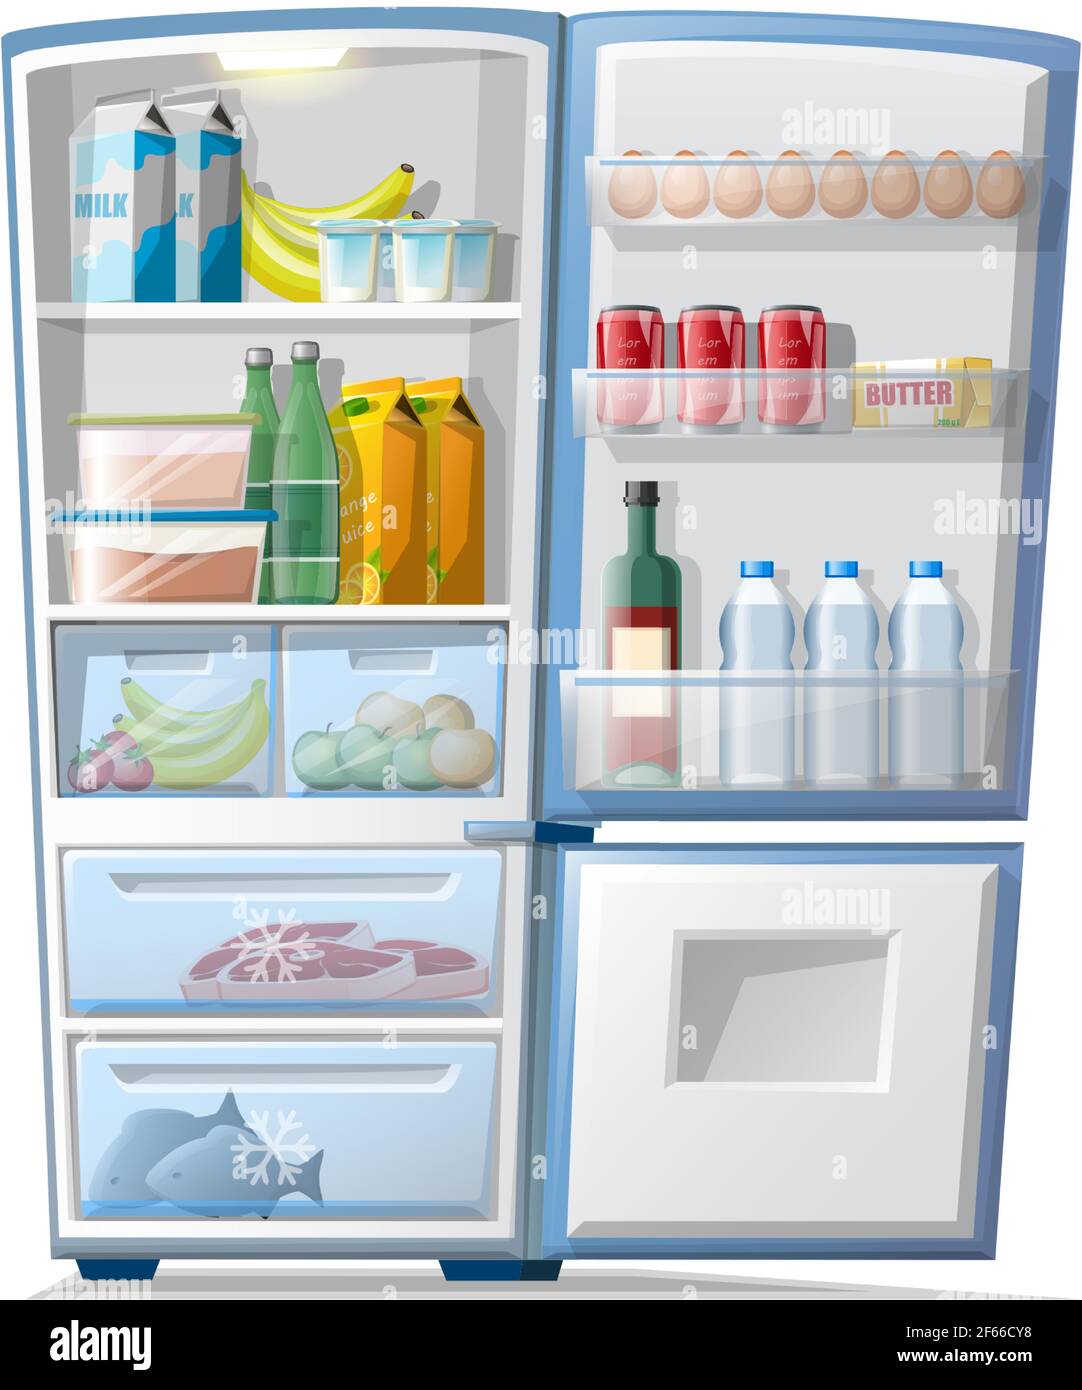 https://c8.alamy.com/comp/2F66CY8/vector-cartoon-style-fridge-with-food-inside-frozen-meat-and-fish-bottles-of-water-and-juice-eggs-etc-isolated-on-white-background-2F66CY8.jpg